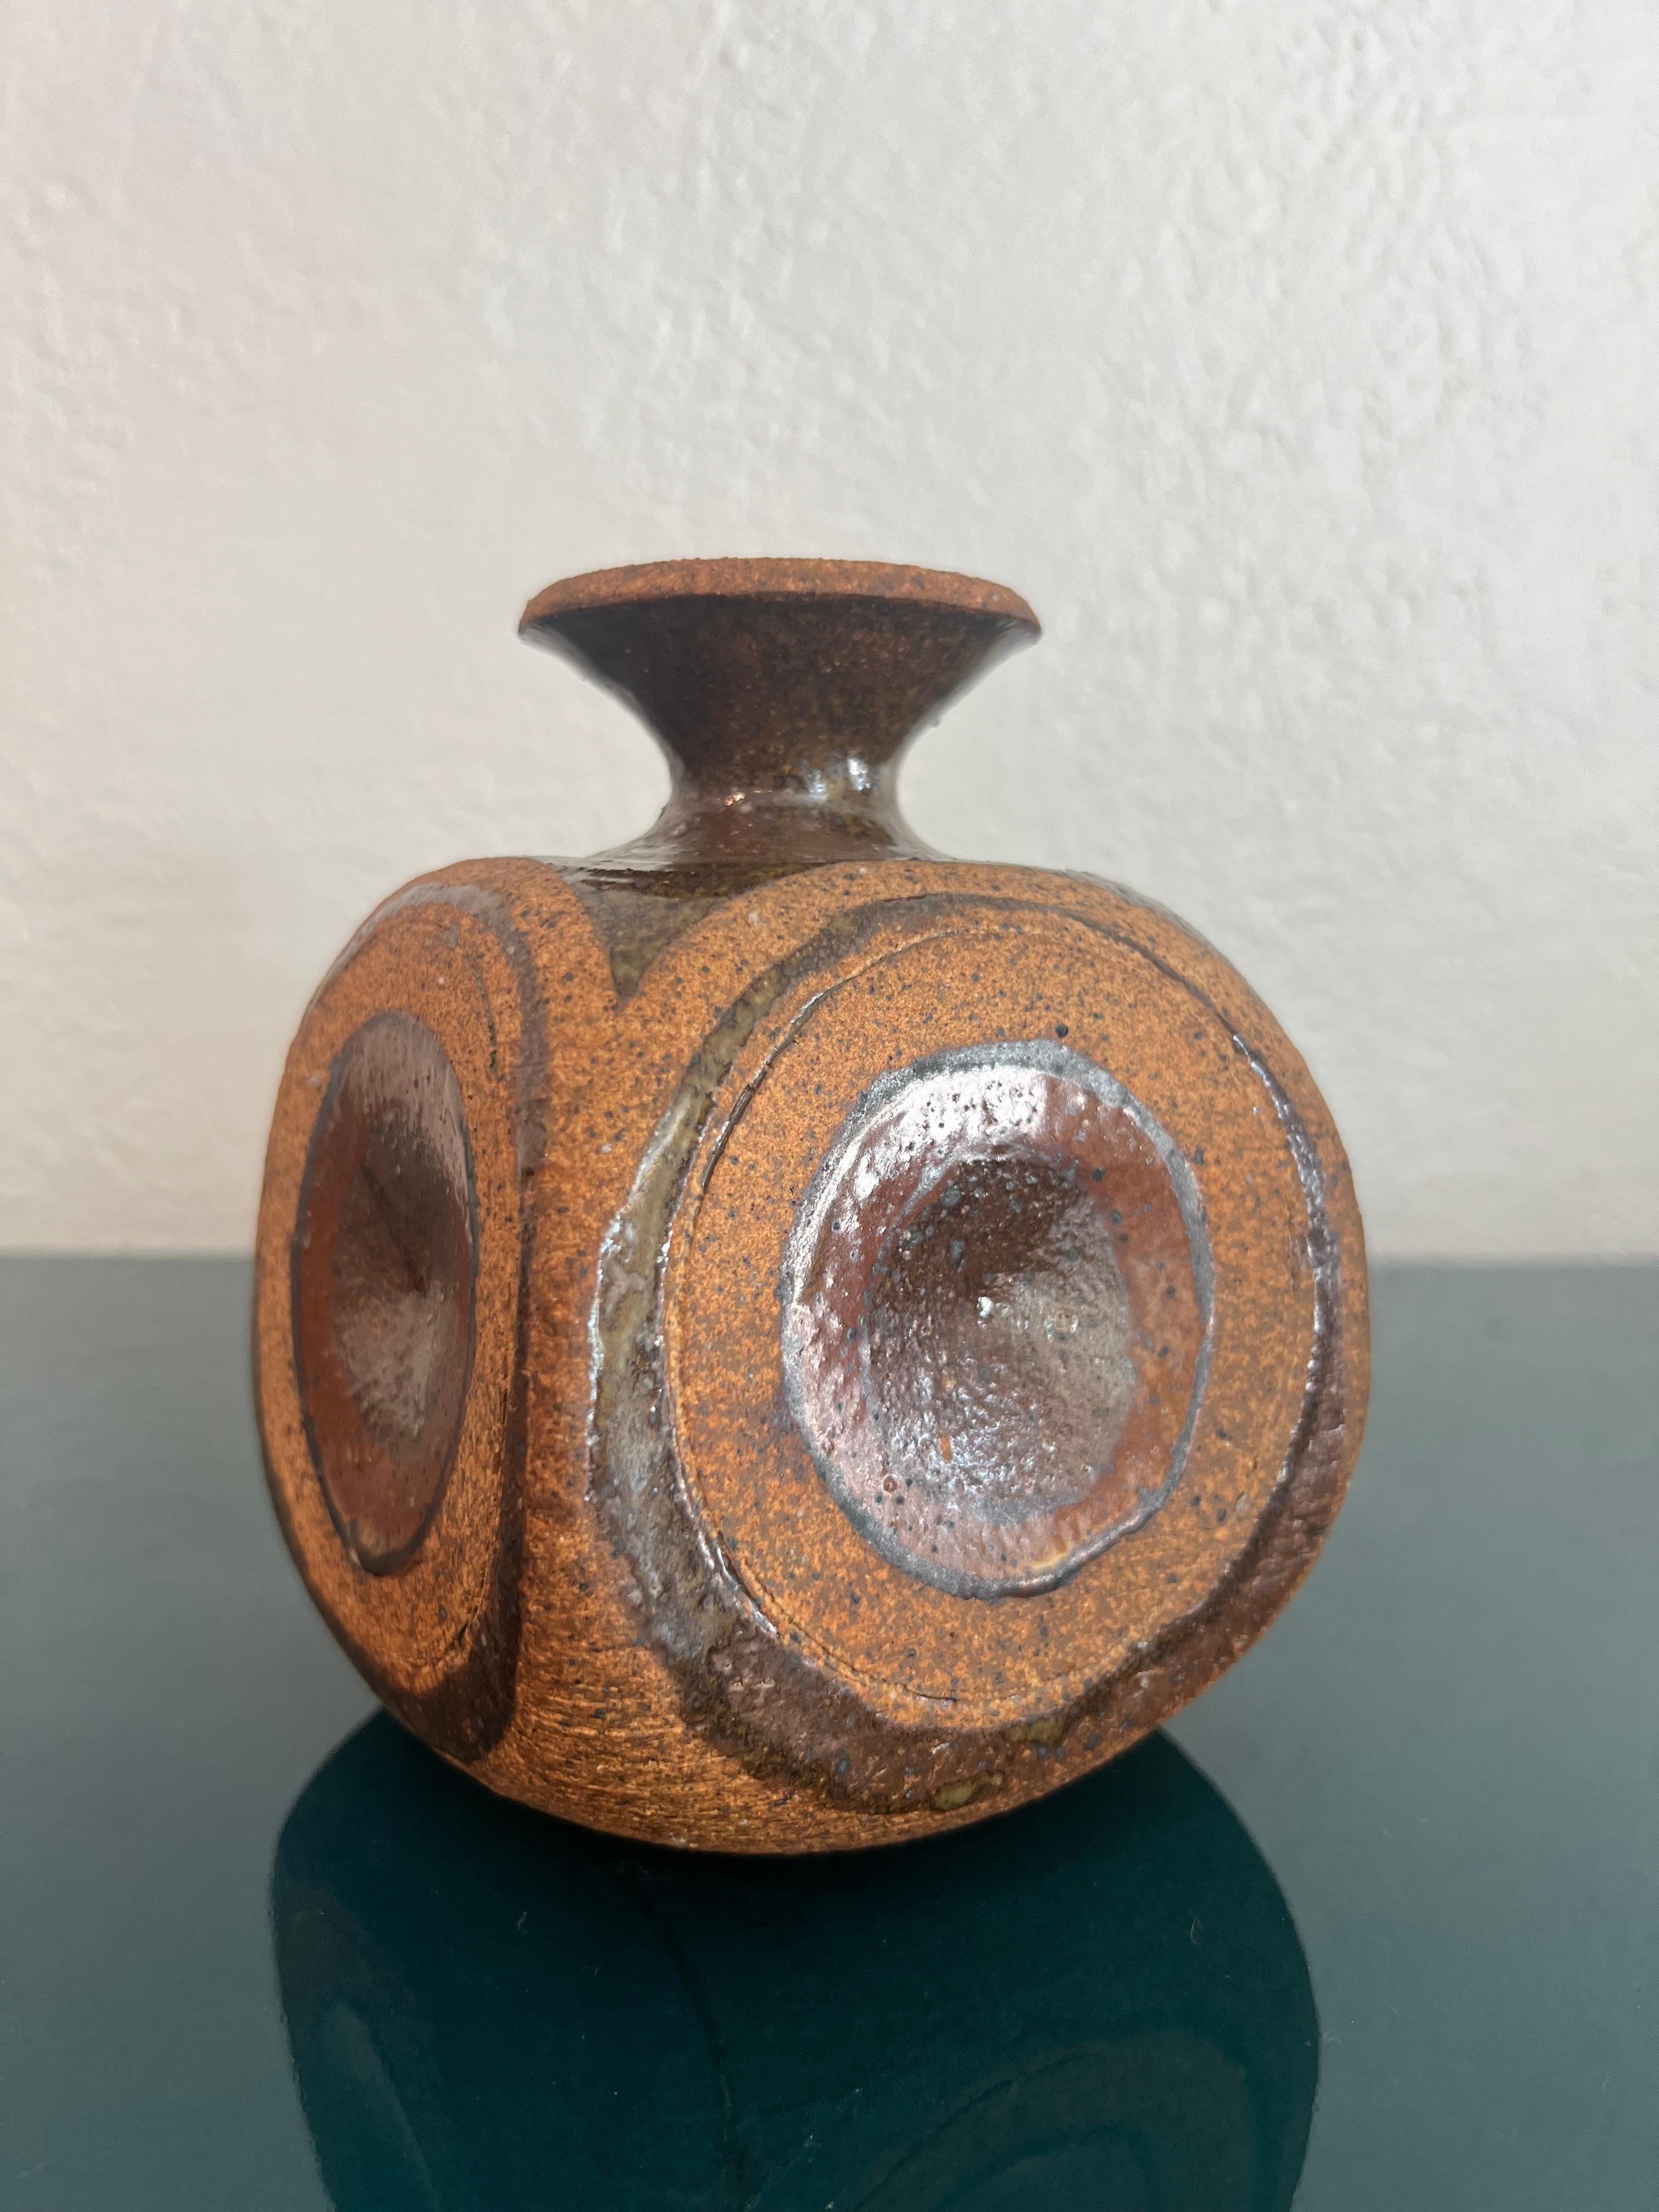 Signed studio pottery weed pot vase. 

Would work well in a variety of interiors such as modern, mid century modern, Hollywood regency, etc. Piece blends seamlessly with other designers such as Warren Platner, Paul Evans, Gabriella Crespi, Edward